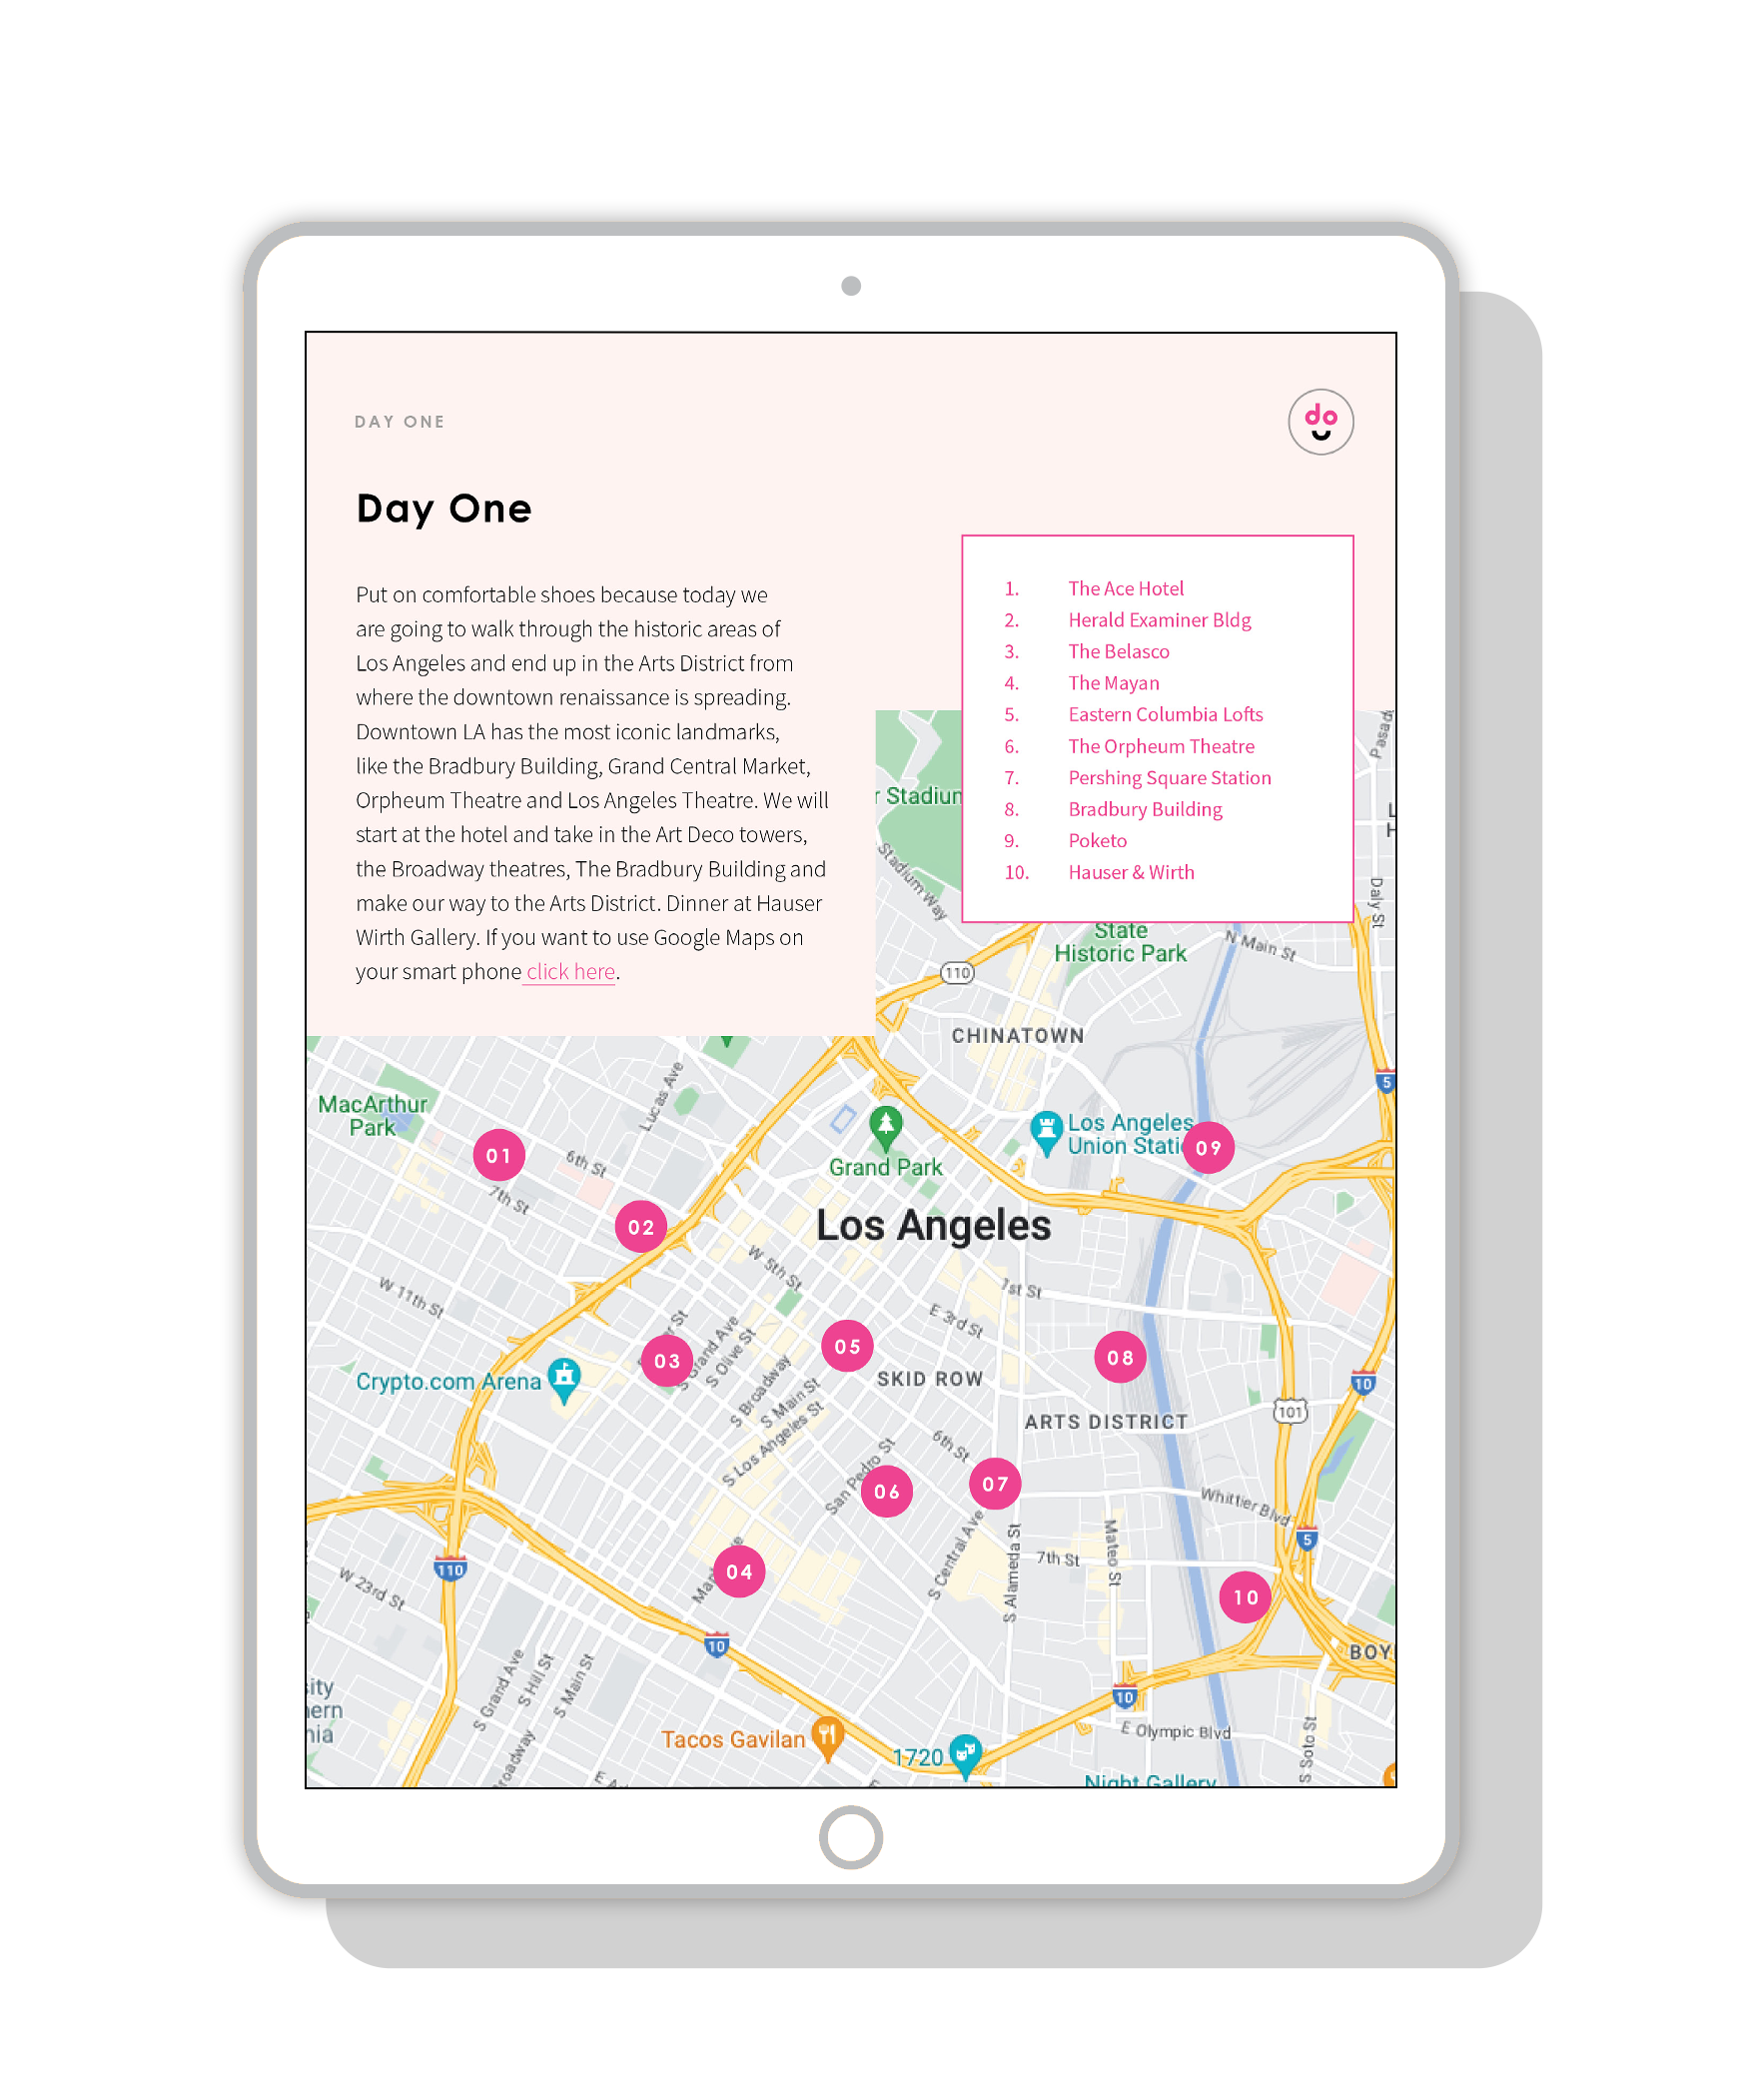 DO Digital Travel Guide: easy to navigate, daily overview with map design | by www.alicia-carvalho.com